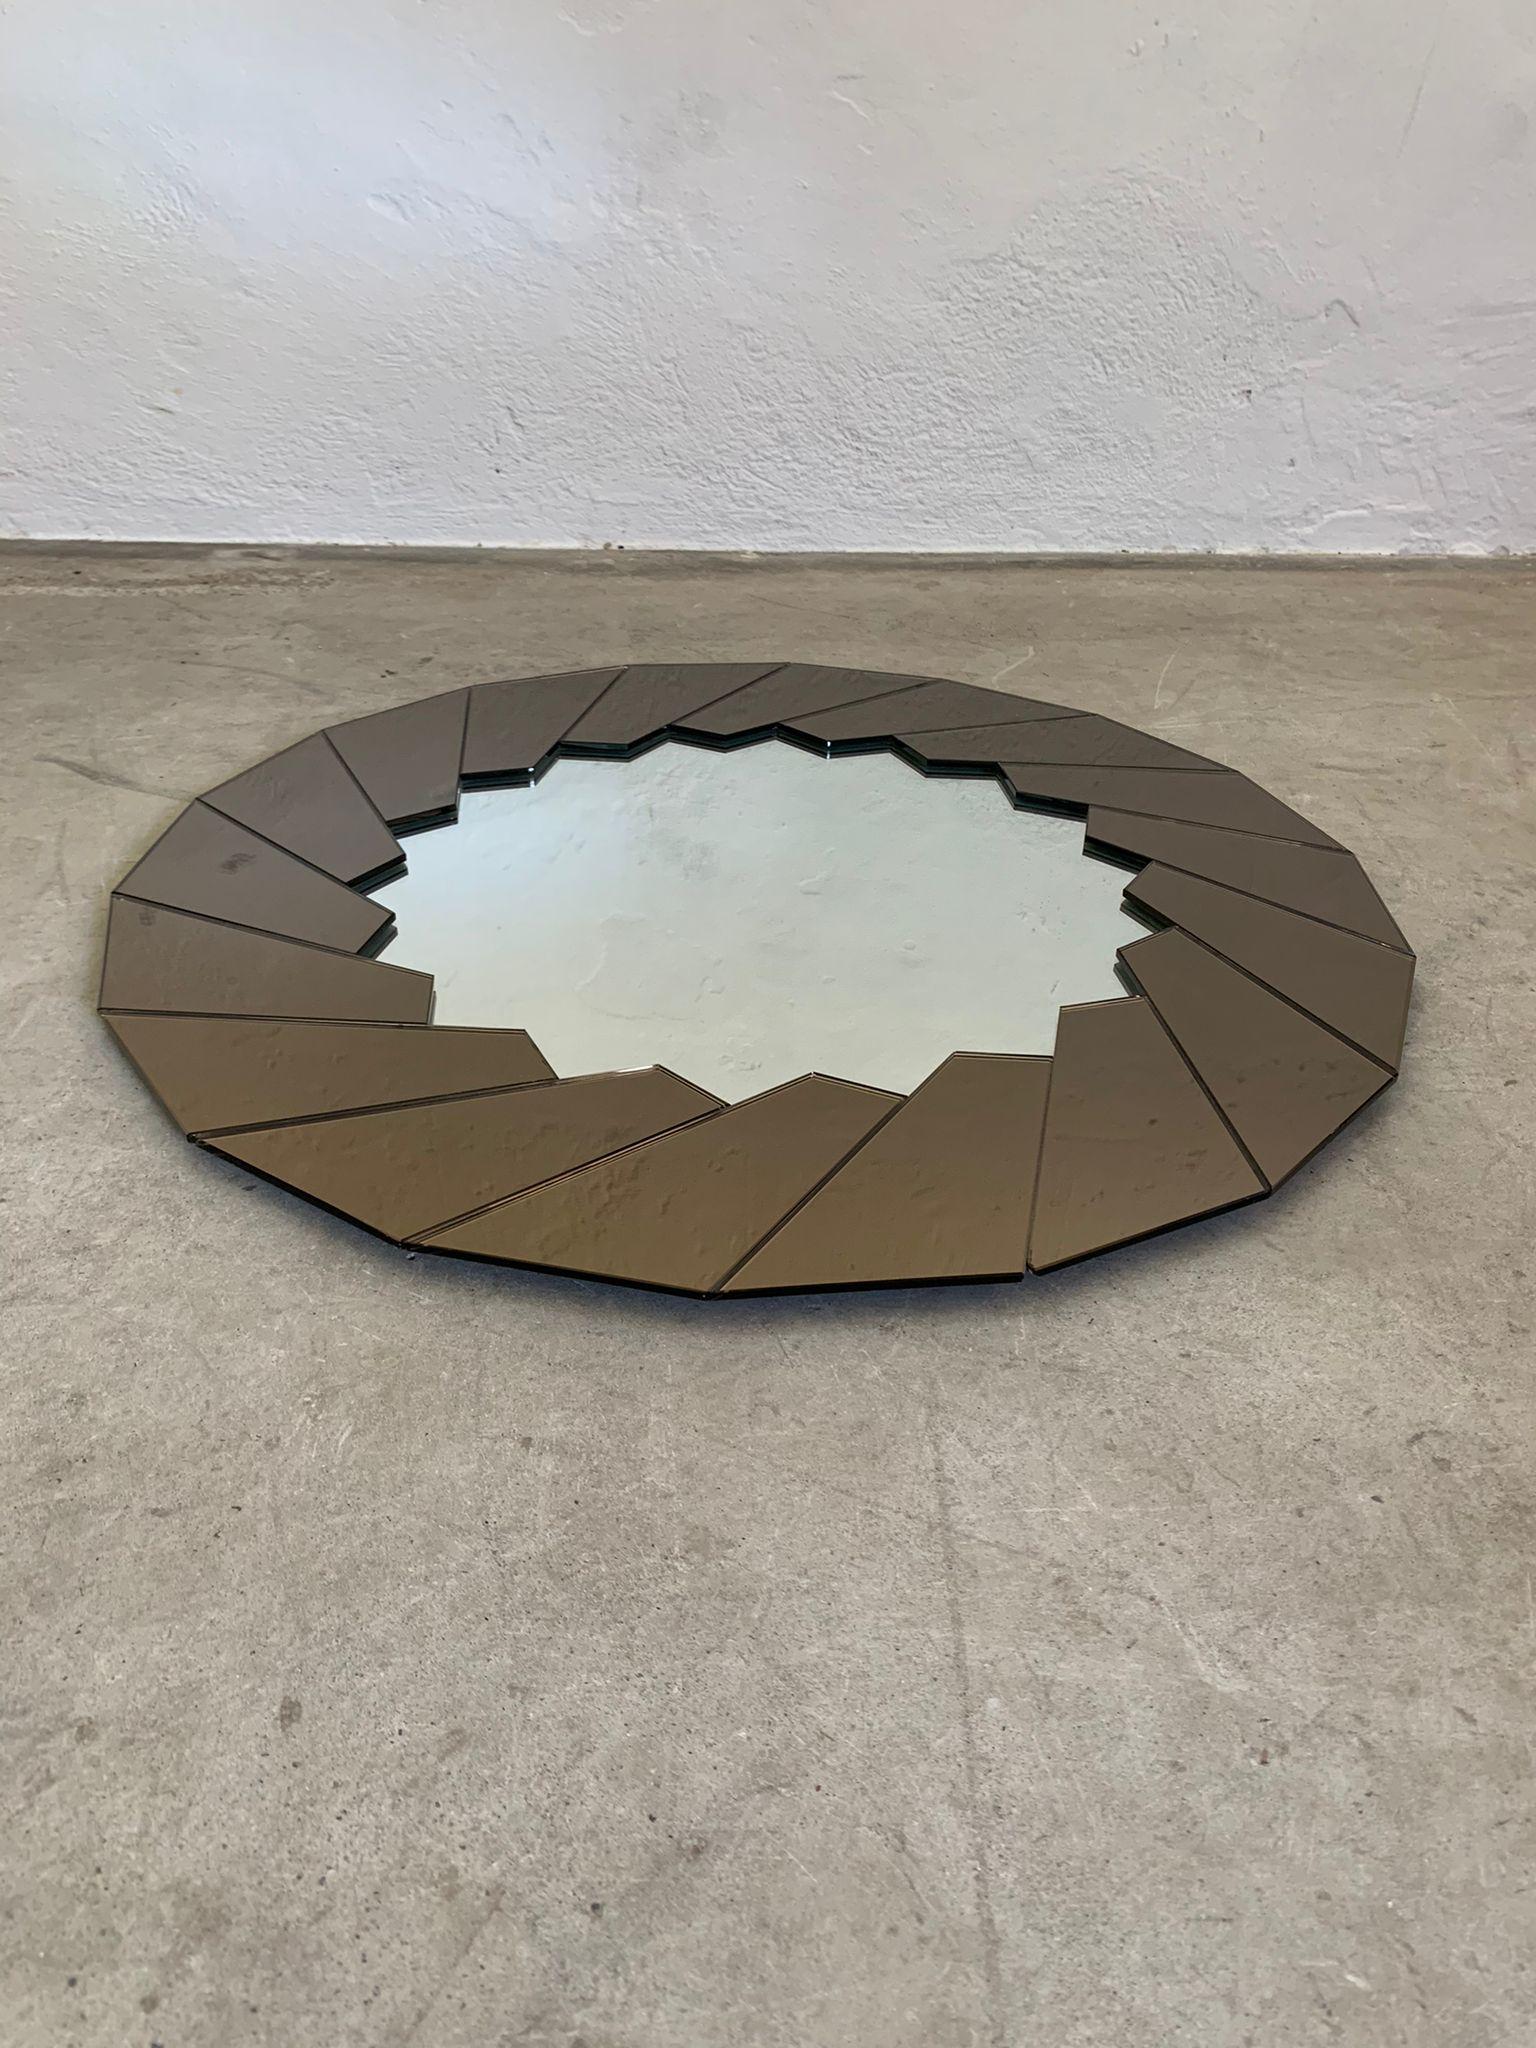 Wall mirror with glass frame attributed to Gae Aulenti, Semiramide, Italy, 1970s

Wall mirror with irregular glass sunburst frame attributed to Gae Aulenti.  Imperfections visible in photo.

